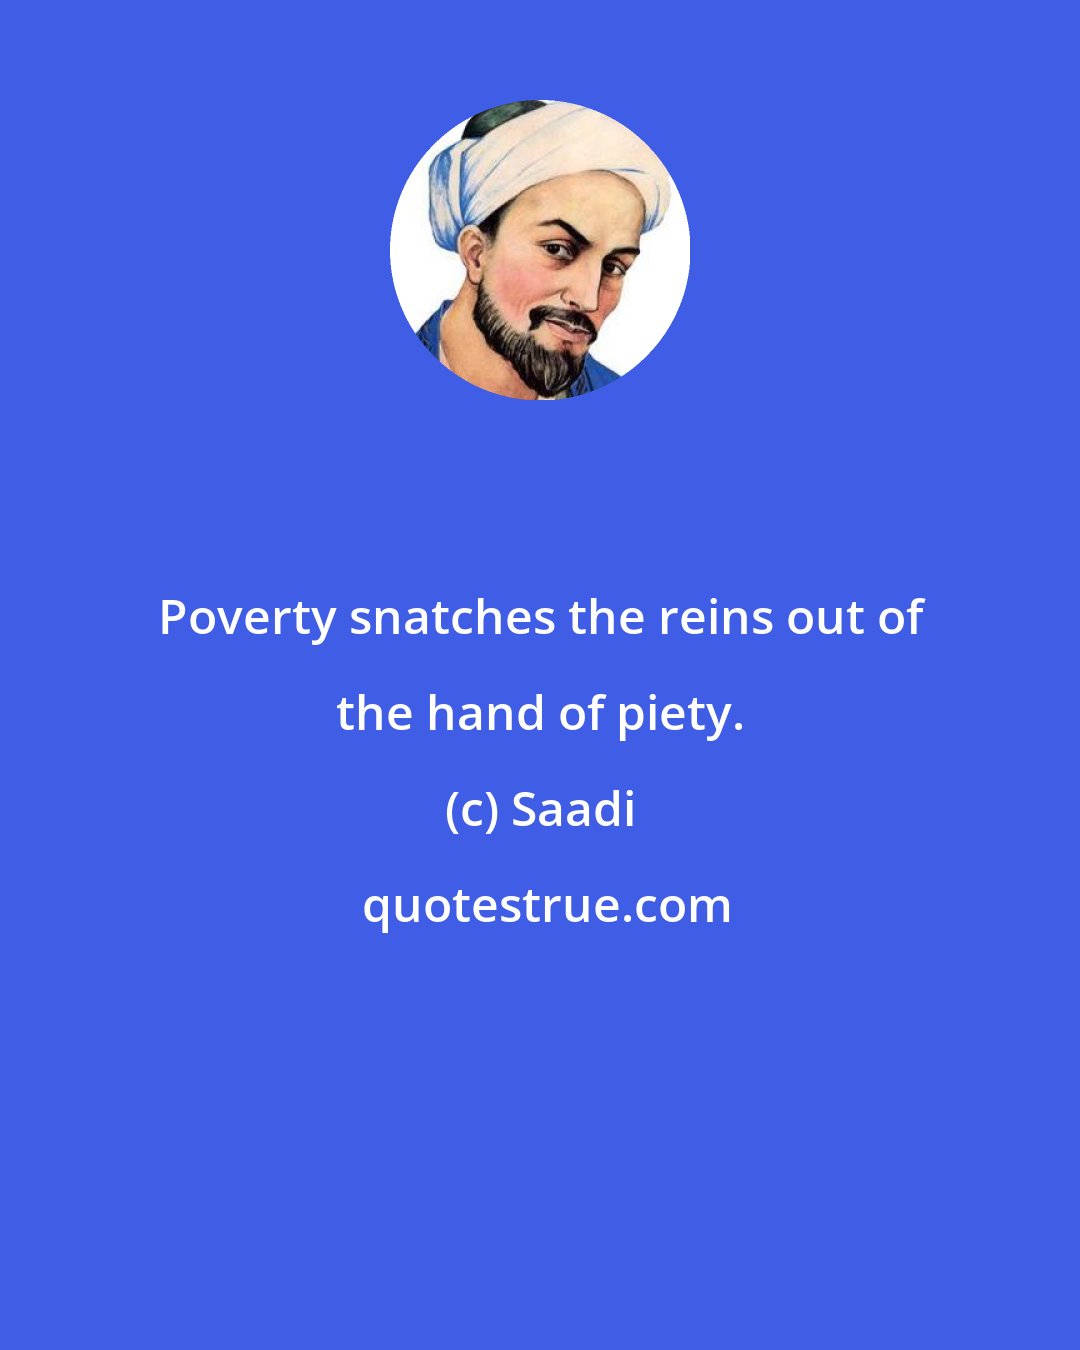 Saadi: Poverty snatches the reins out of the hand of piety.